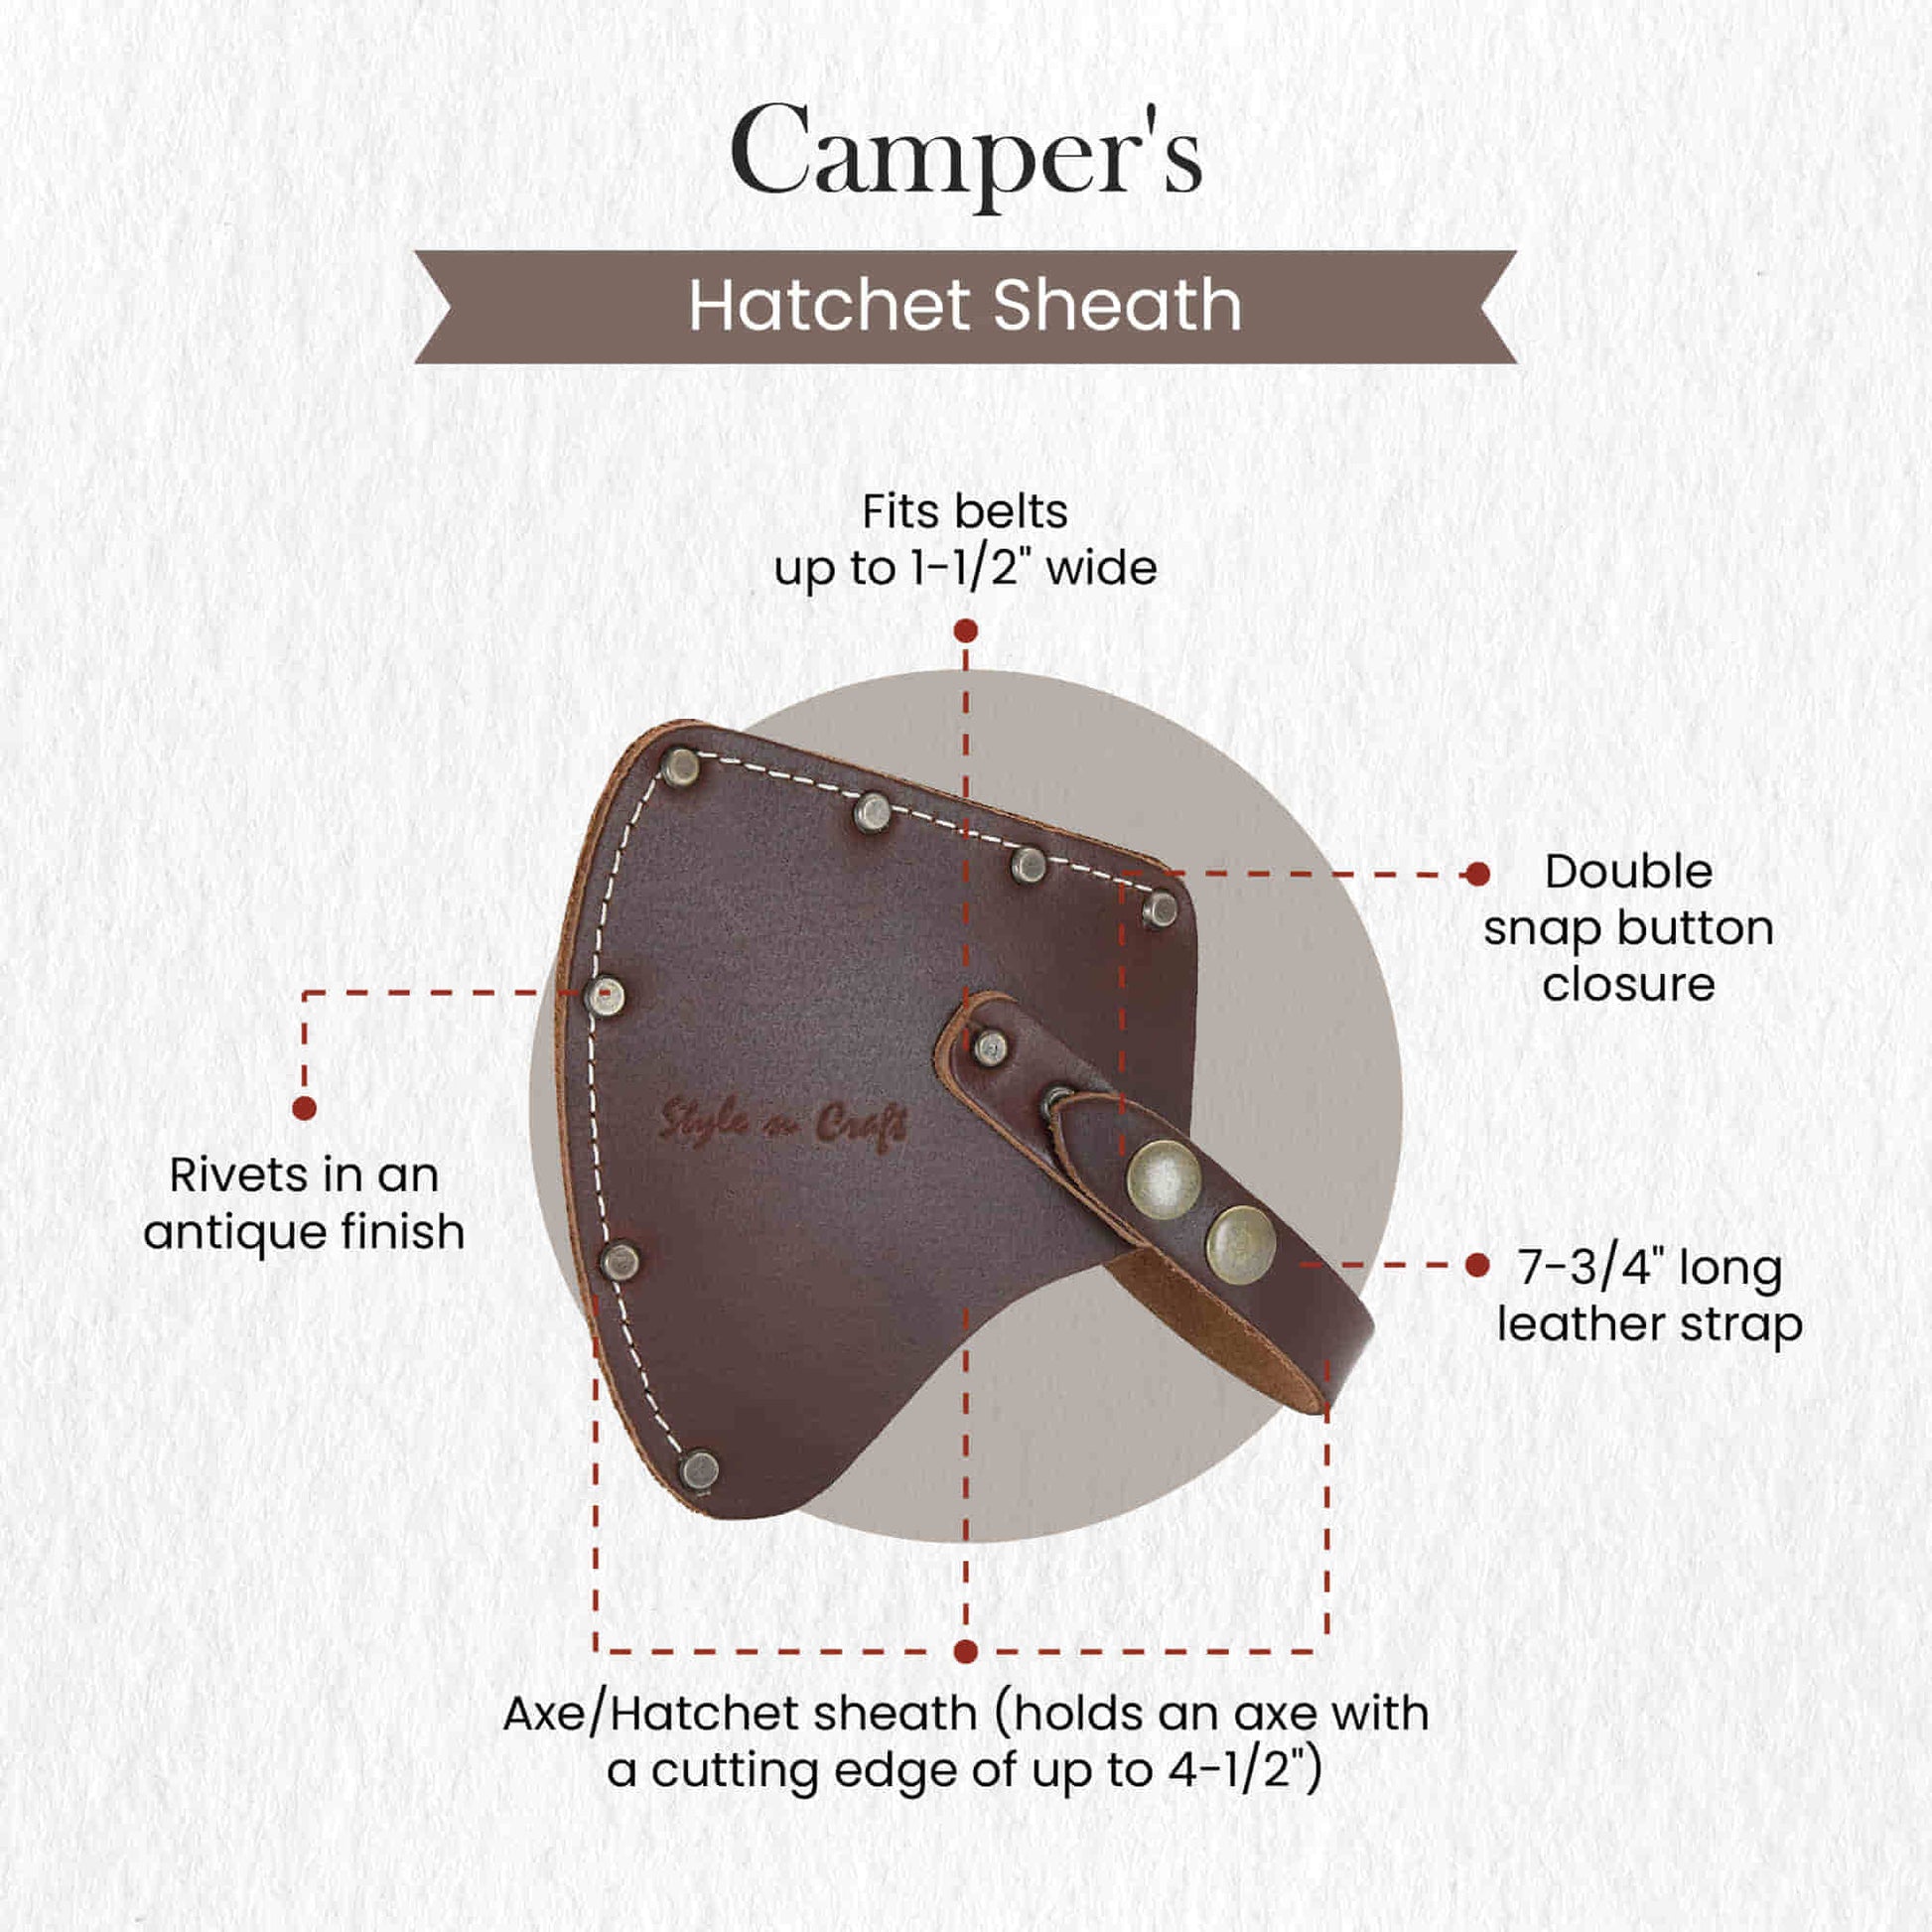 Style n Craft 98025 - Camper's Hatchet Sheath / Axe Cover in Heavy Top Grain Leather in Dark Tan Color. It has a Double Snap Button Closure - Front View showing details